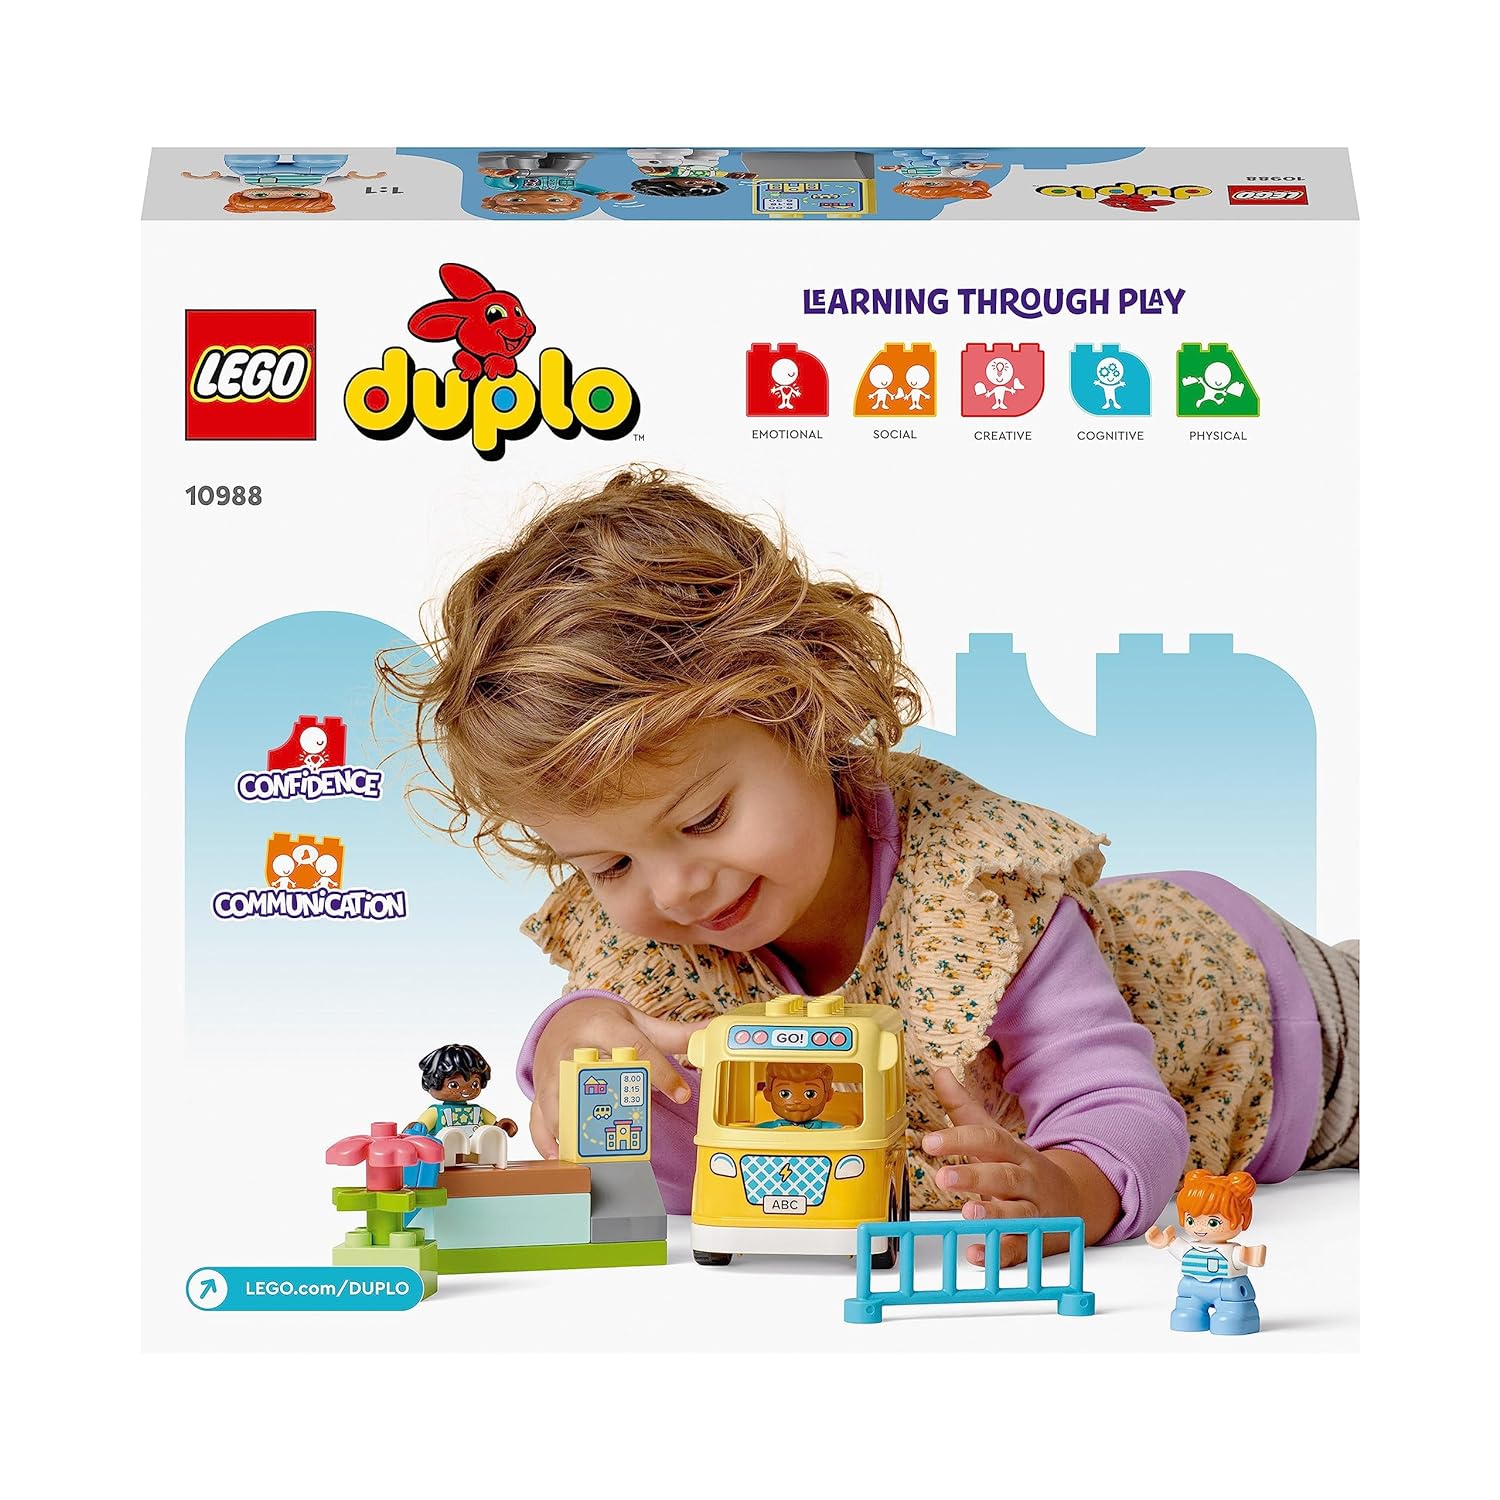 LEGO DUPLO Town The Bus Ride Building Kit for Ages 2+